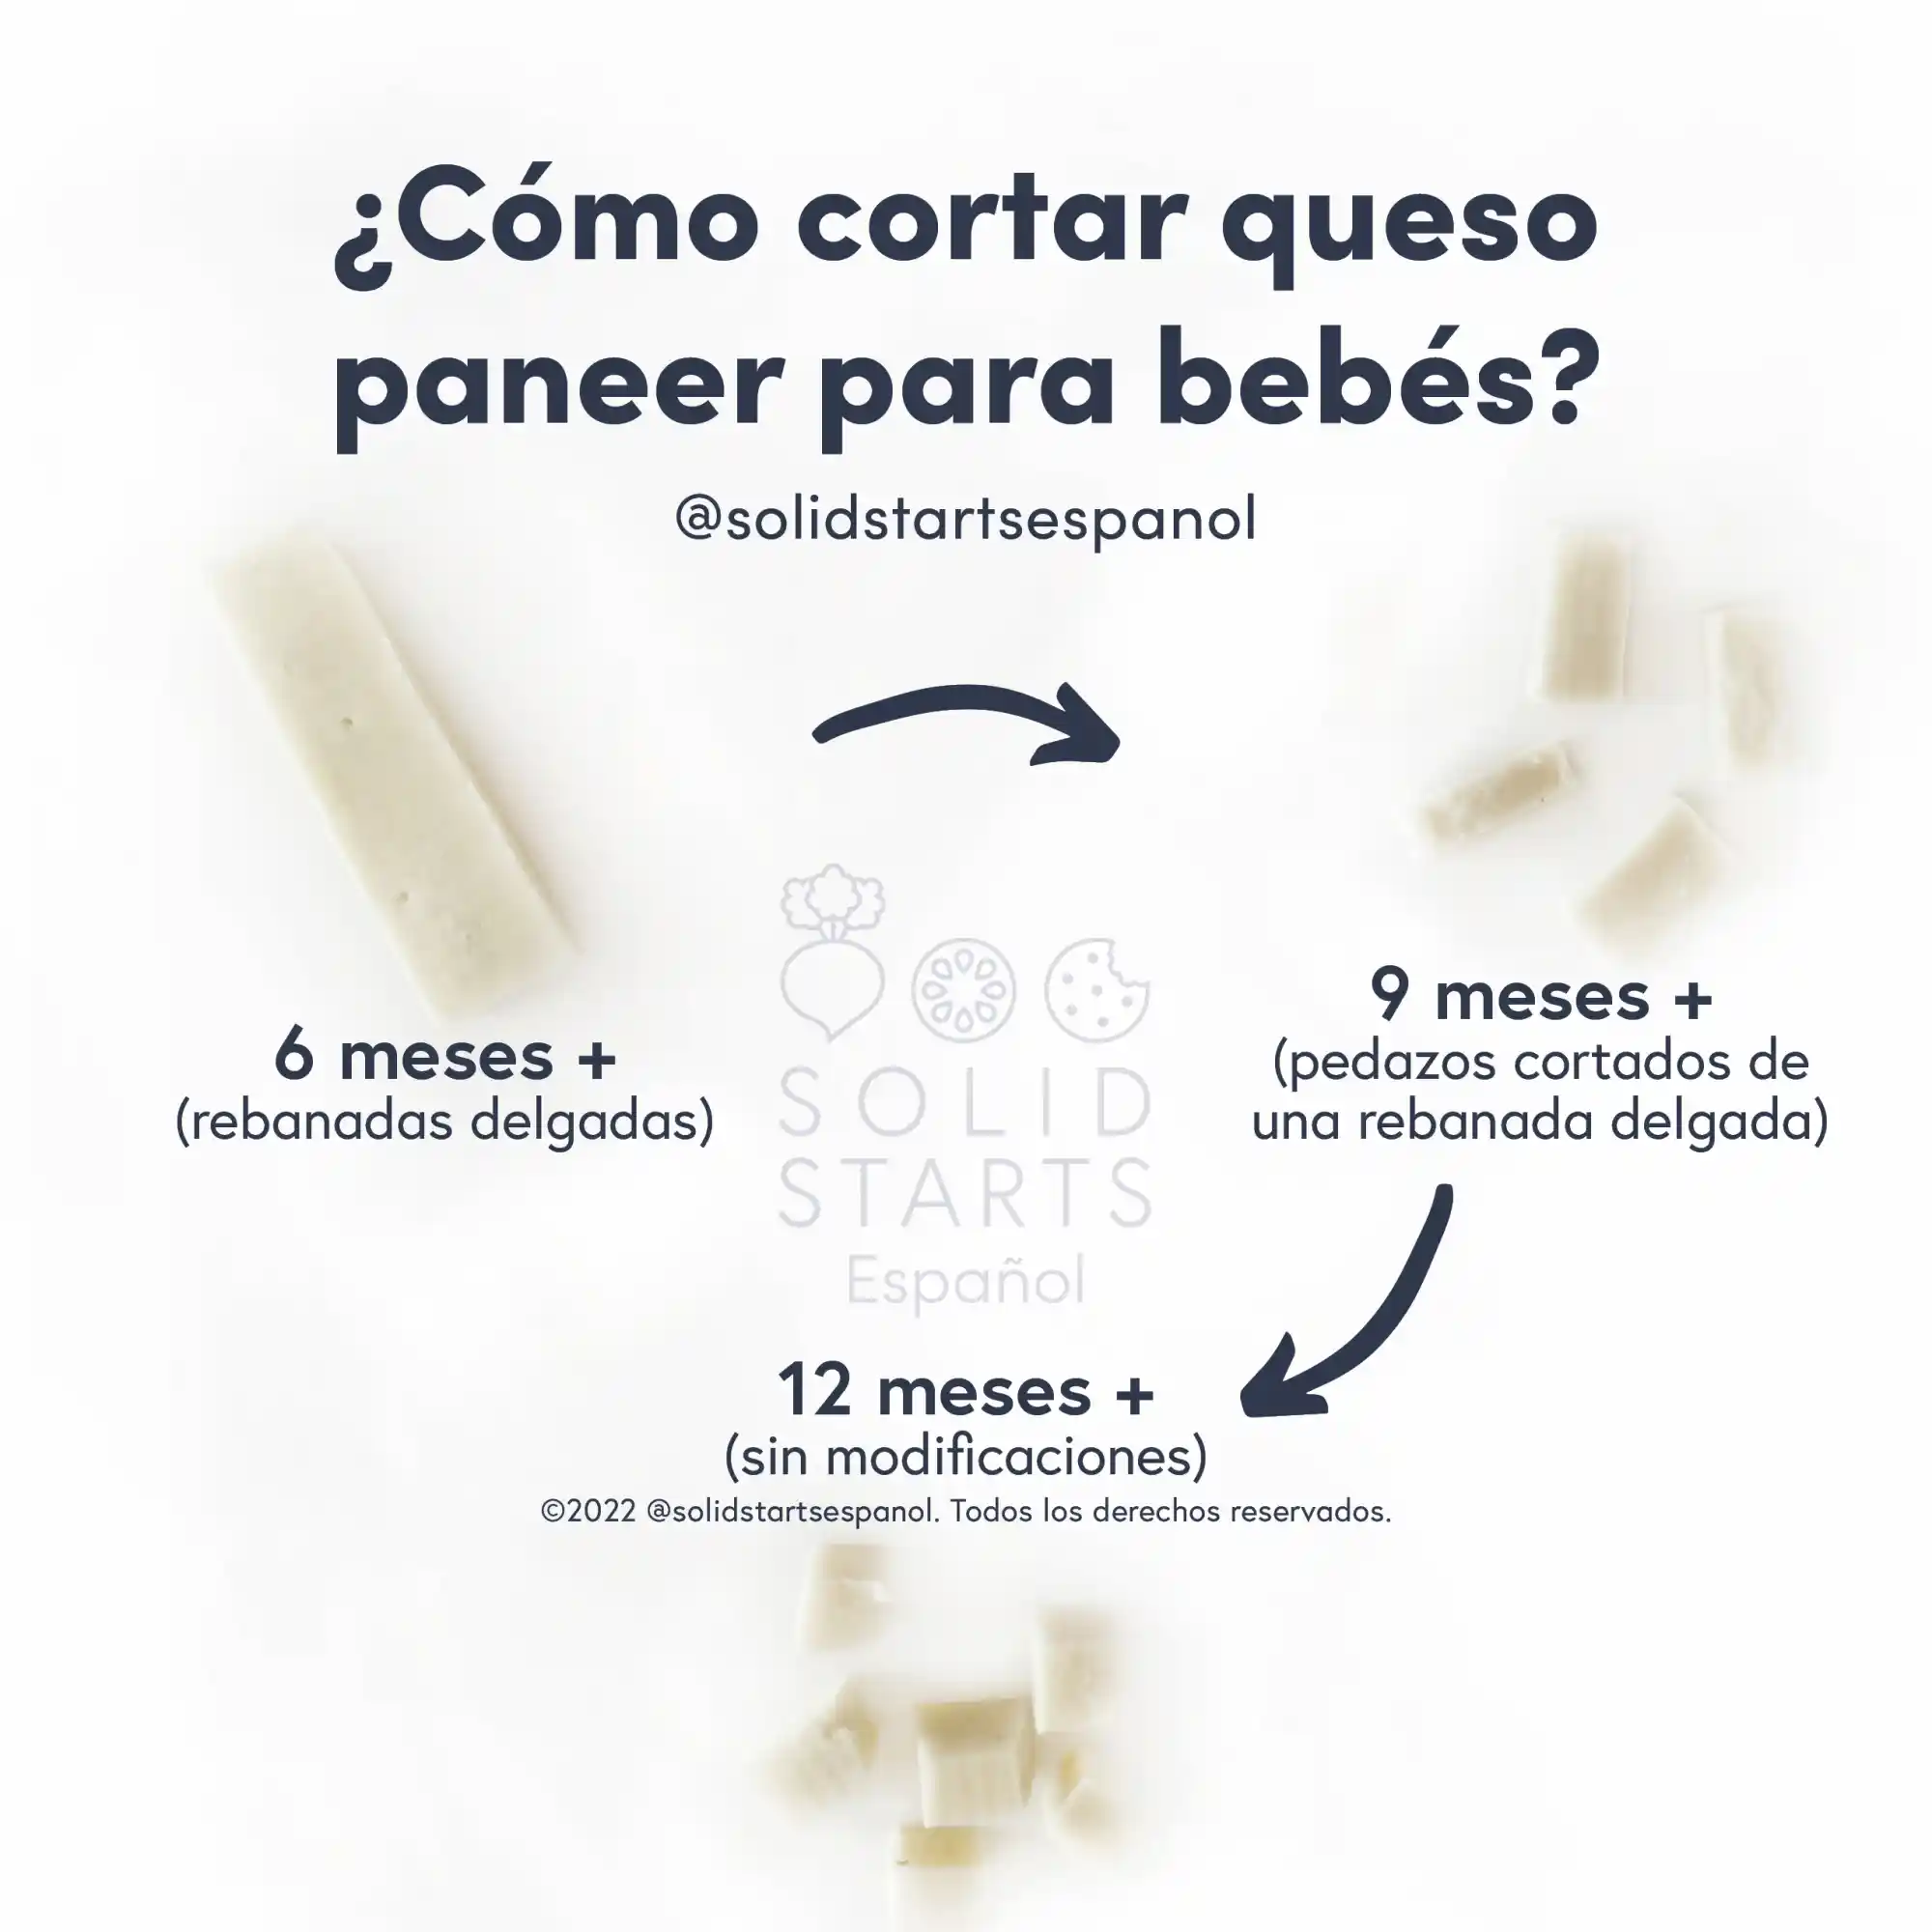 an infographic with the header "how to cut paneer for babies": a long, thin slice for 6 months+, bite-sized pieces from a thin slice for 9 months+, no modifications for 12 months+